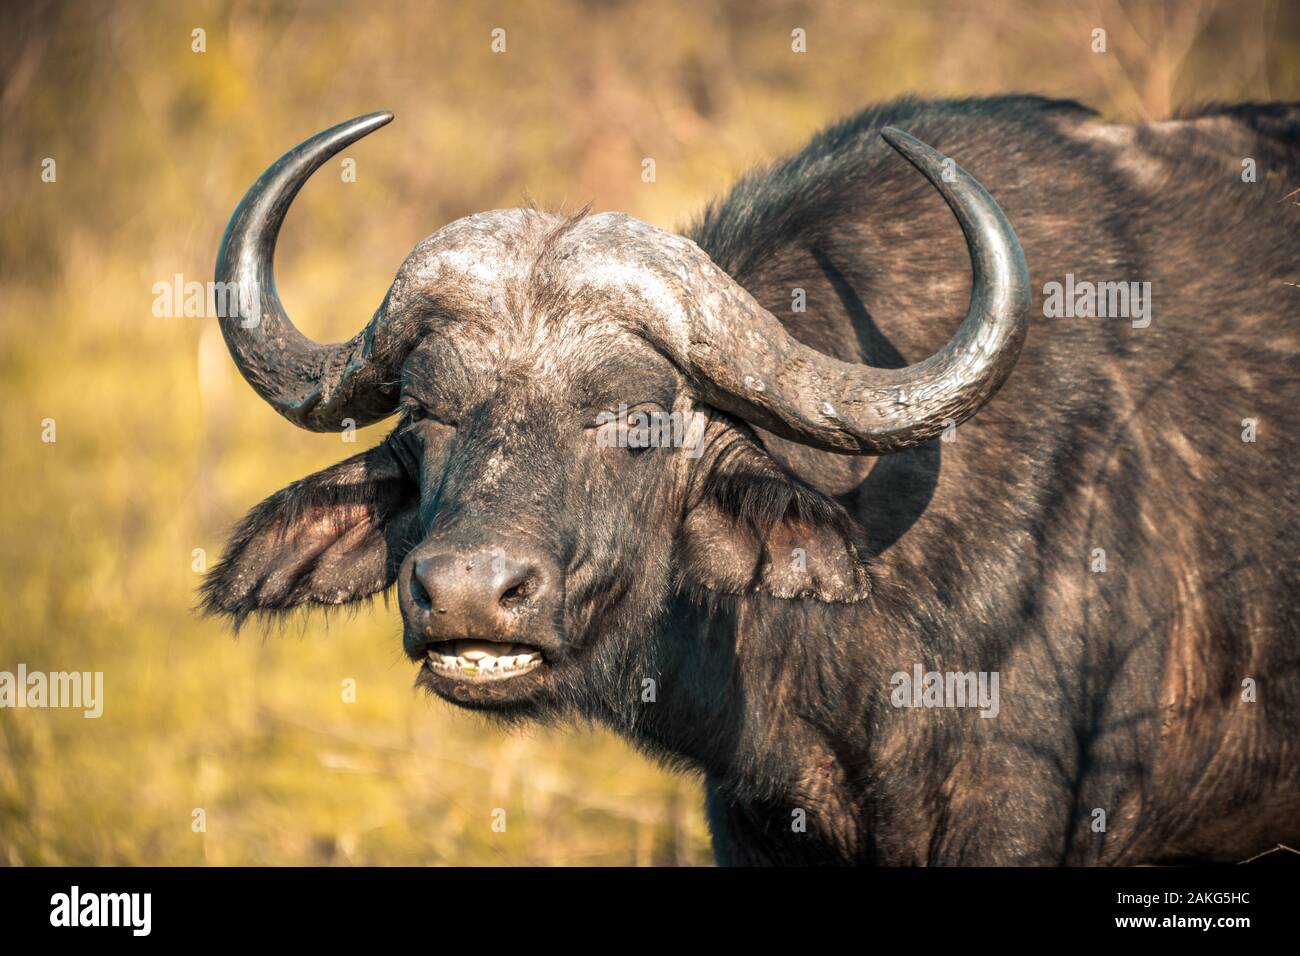 A buffalo at sunrise during a safari in the Hluhluwe - imfolozi National Park in South Africa Stock Photo